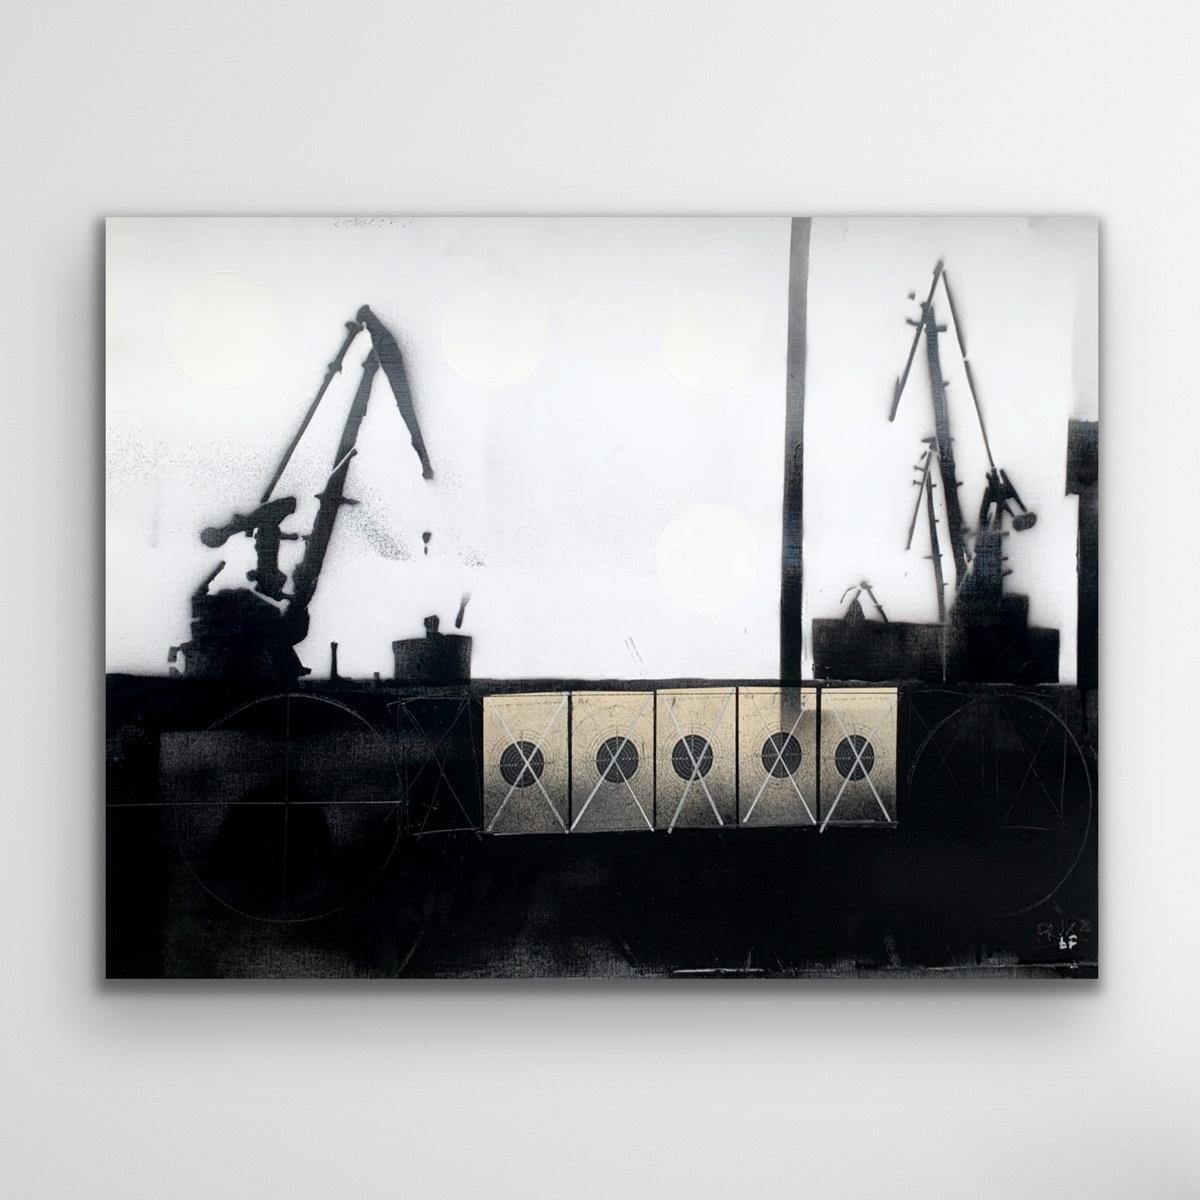 Cranes 3 - Black & white painting, Mixed media, Collage, Polish art For Sale 1